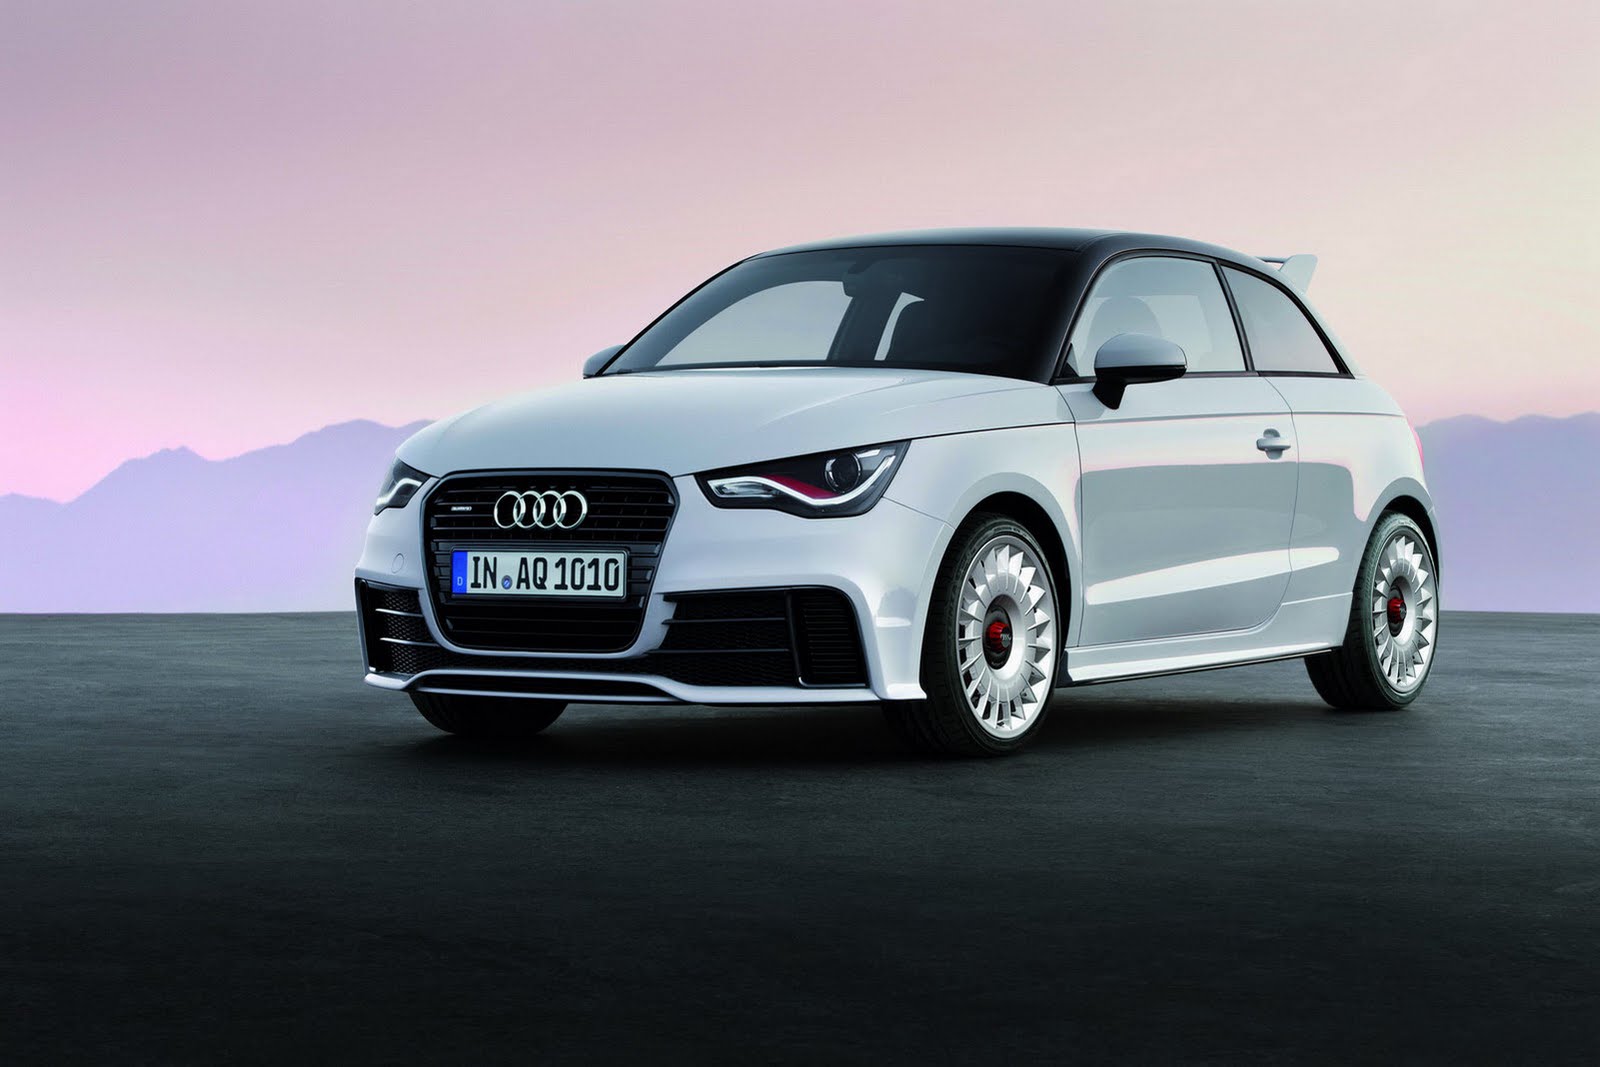 Limited-production Audi A1 quattro has monster power to all four